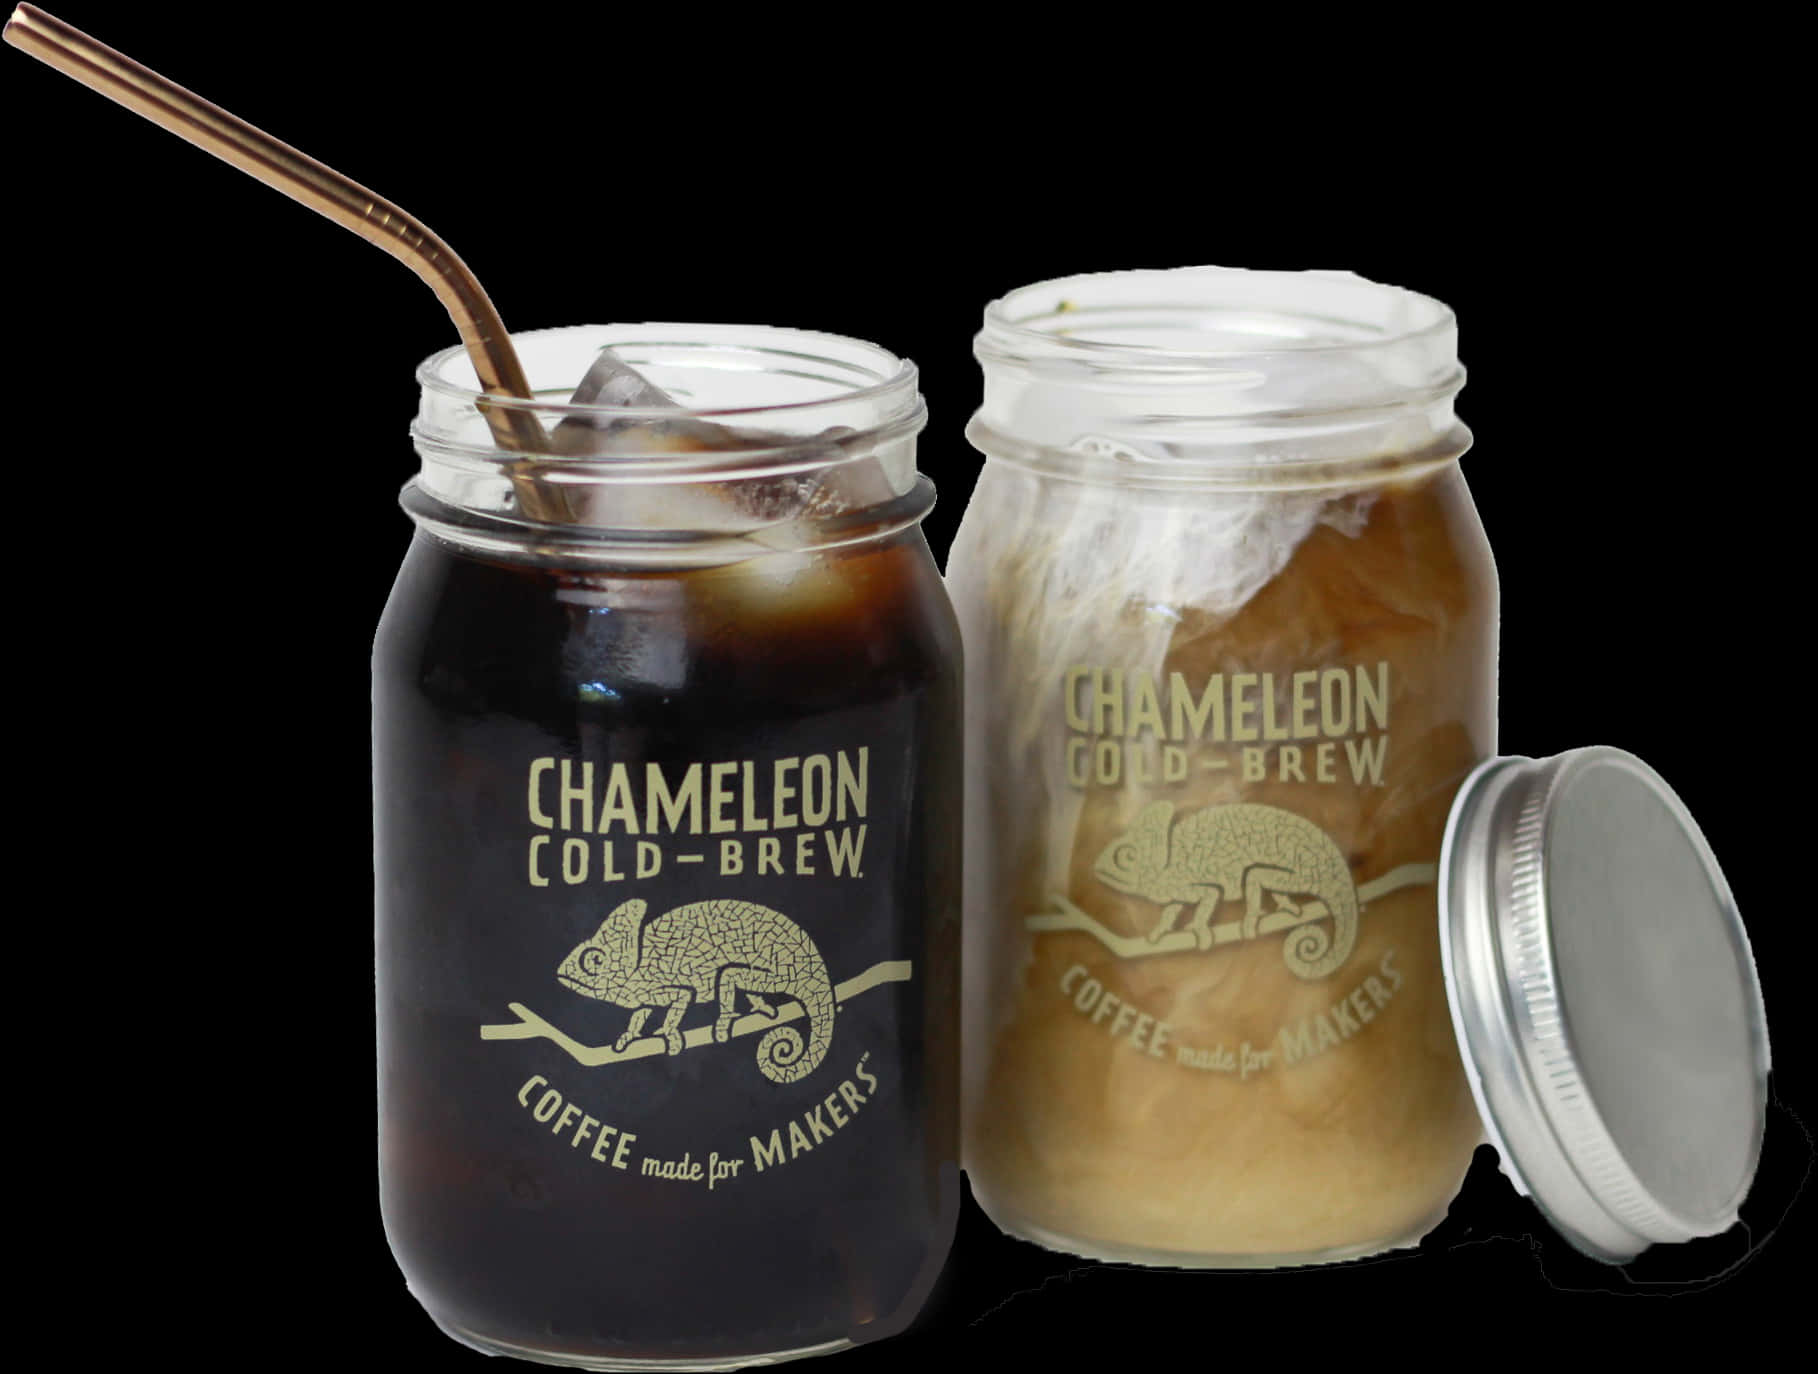 A Glass Jars With A Straw And A Brown Liquid With A Metal Straw